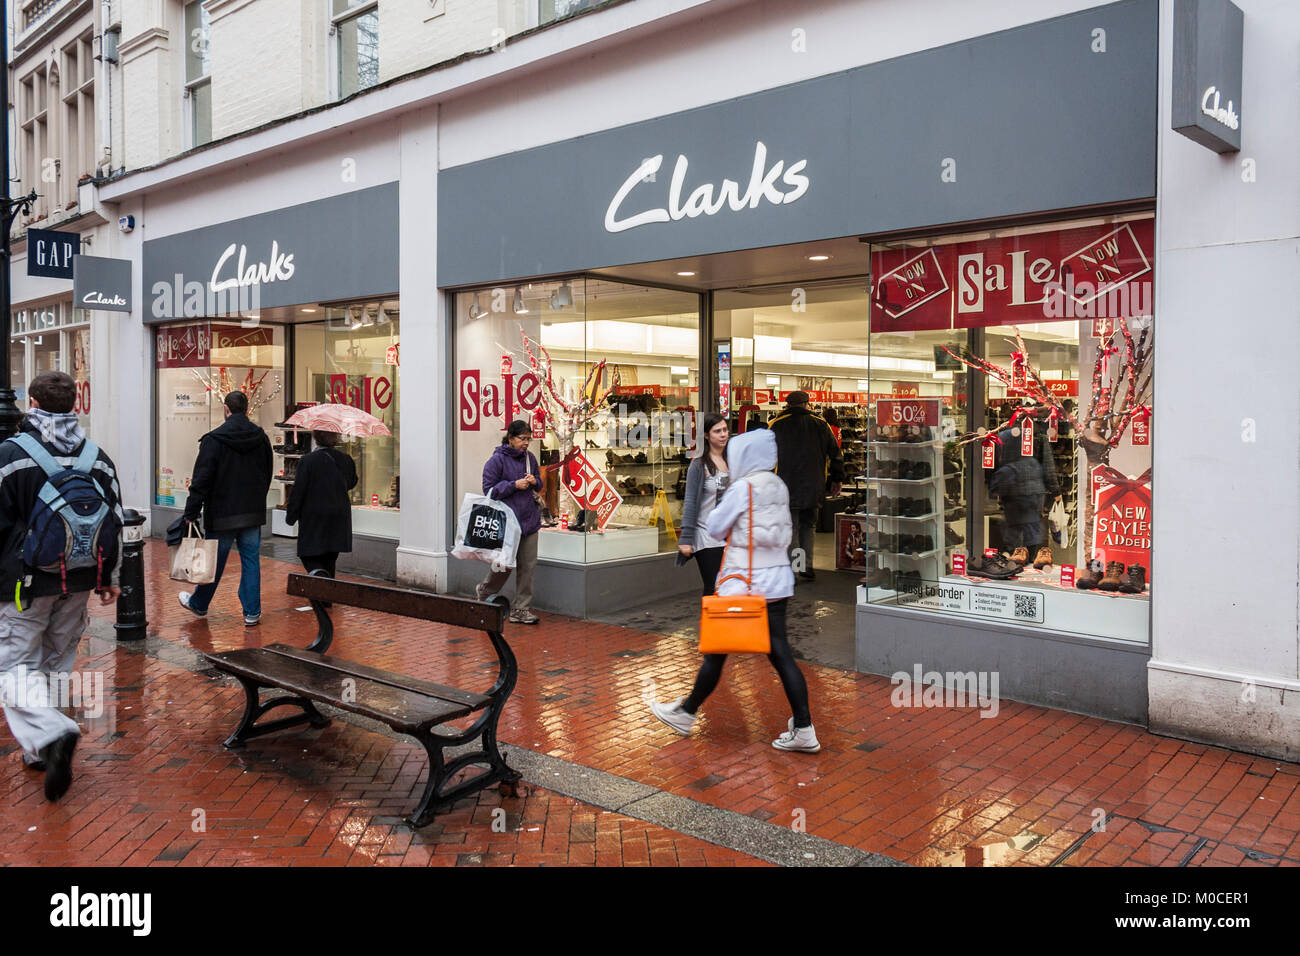 clarks shoes plymouth